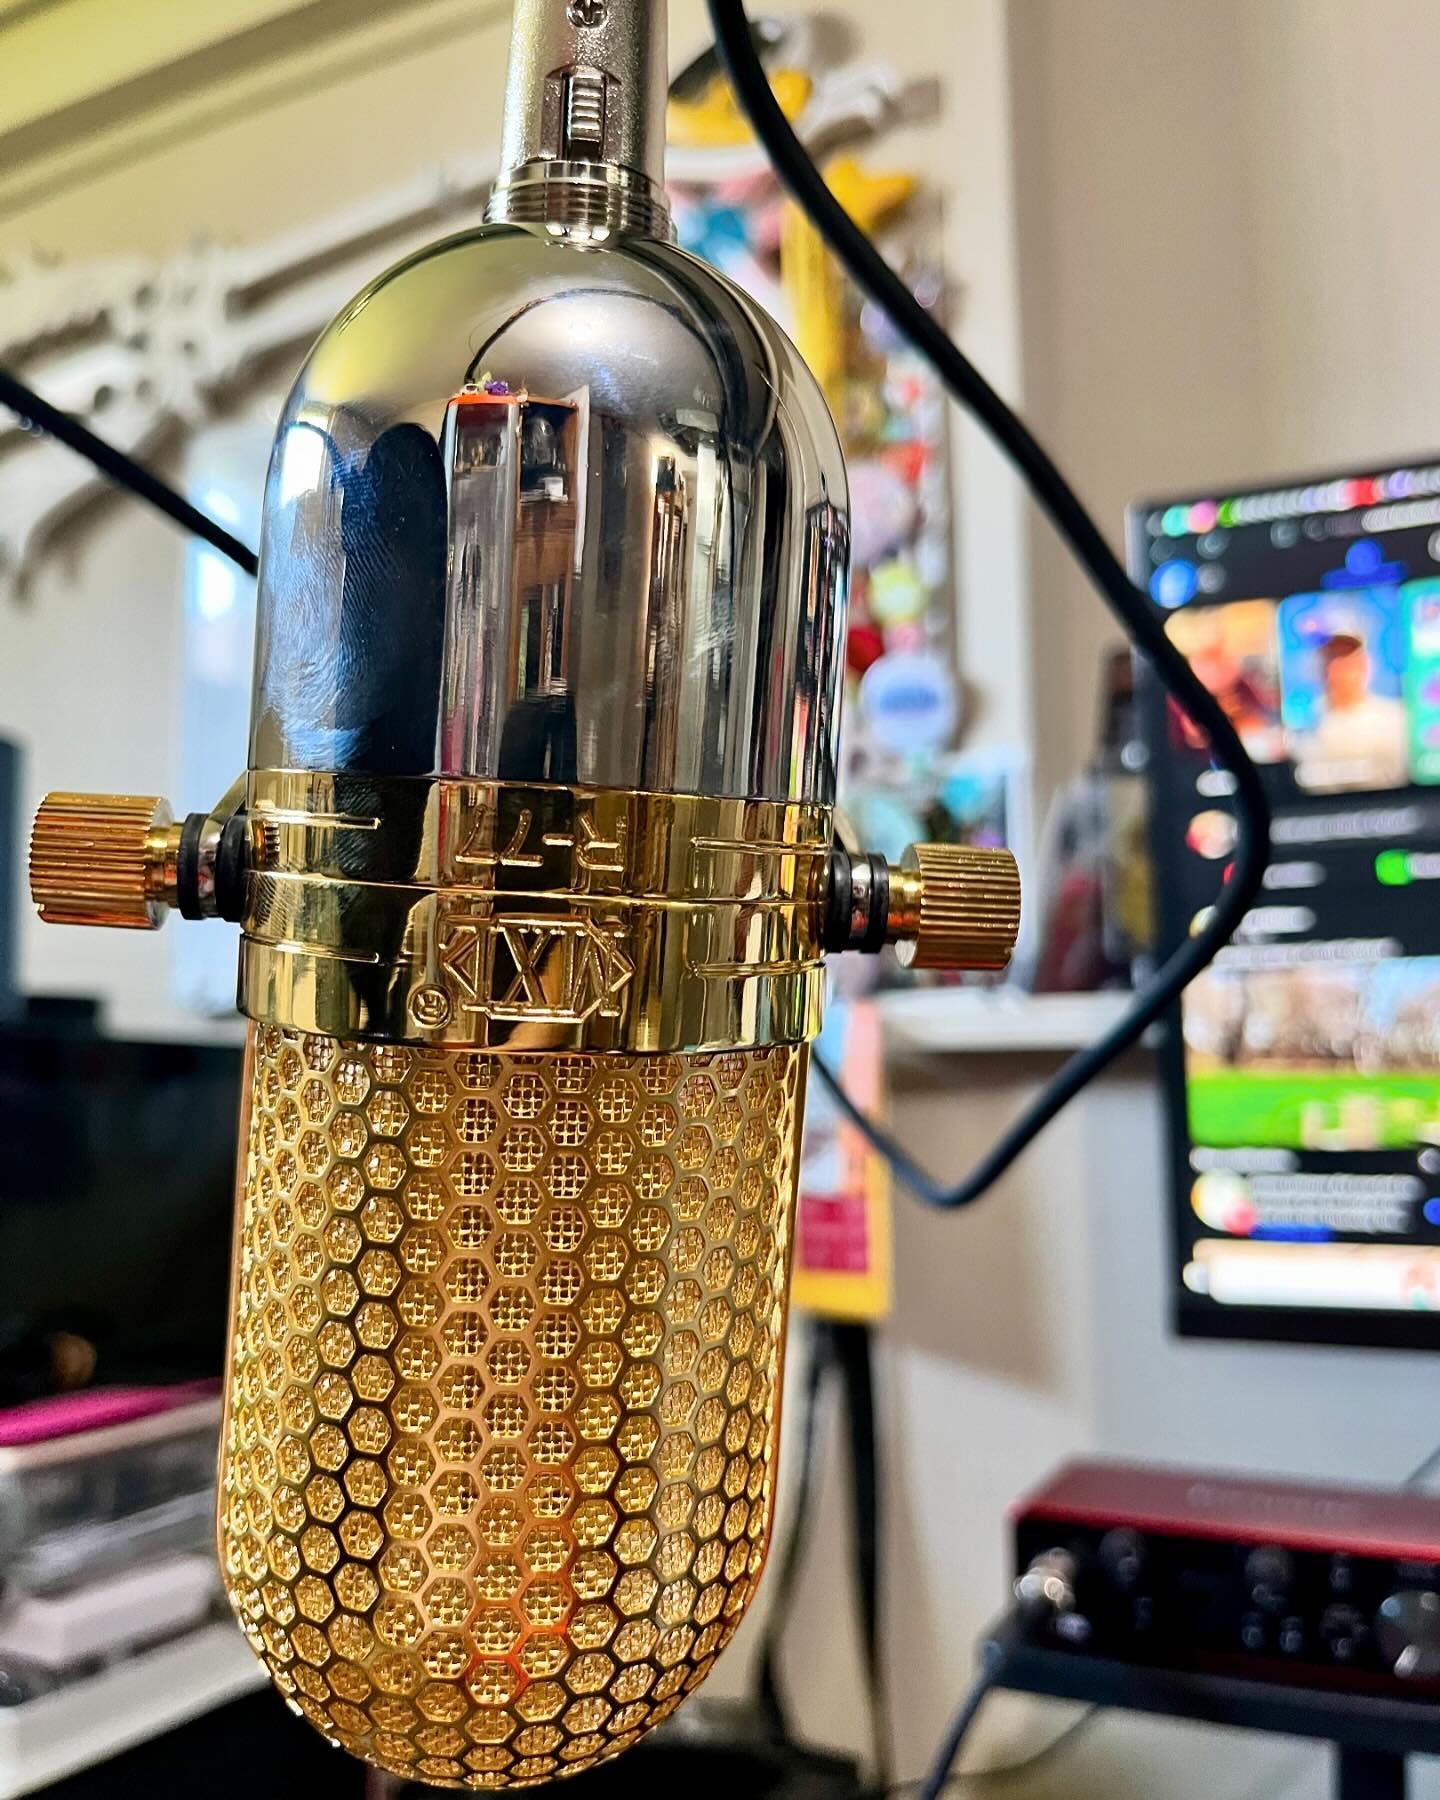 A cheap USB mic just didn&rsquo;t last, but it was a great start. Finally, the Brimstone podcasting set up has needed equipment!

#mxl #mic #microphones #recording #podcast #soundcard #focusrite #focusrite2i2 #focusritescarlett #podcasting